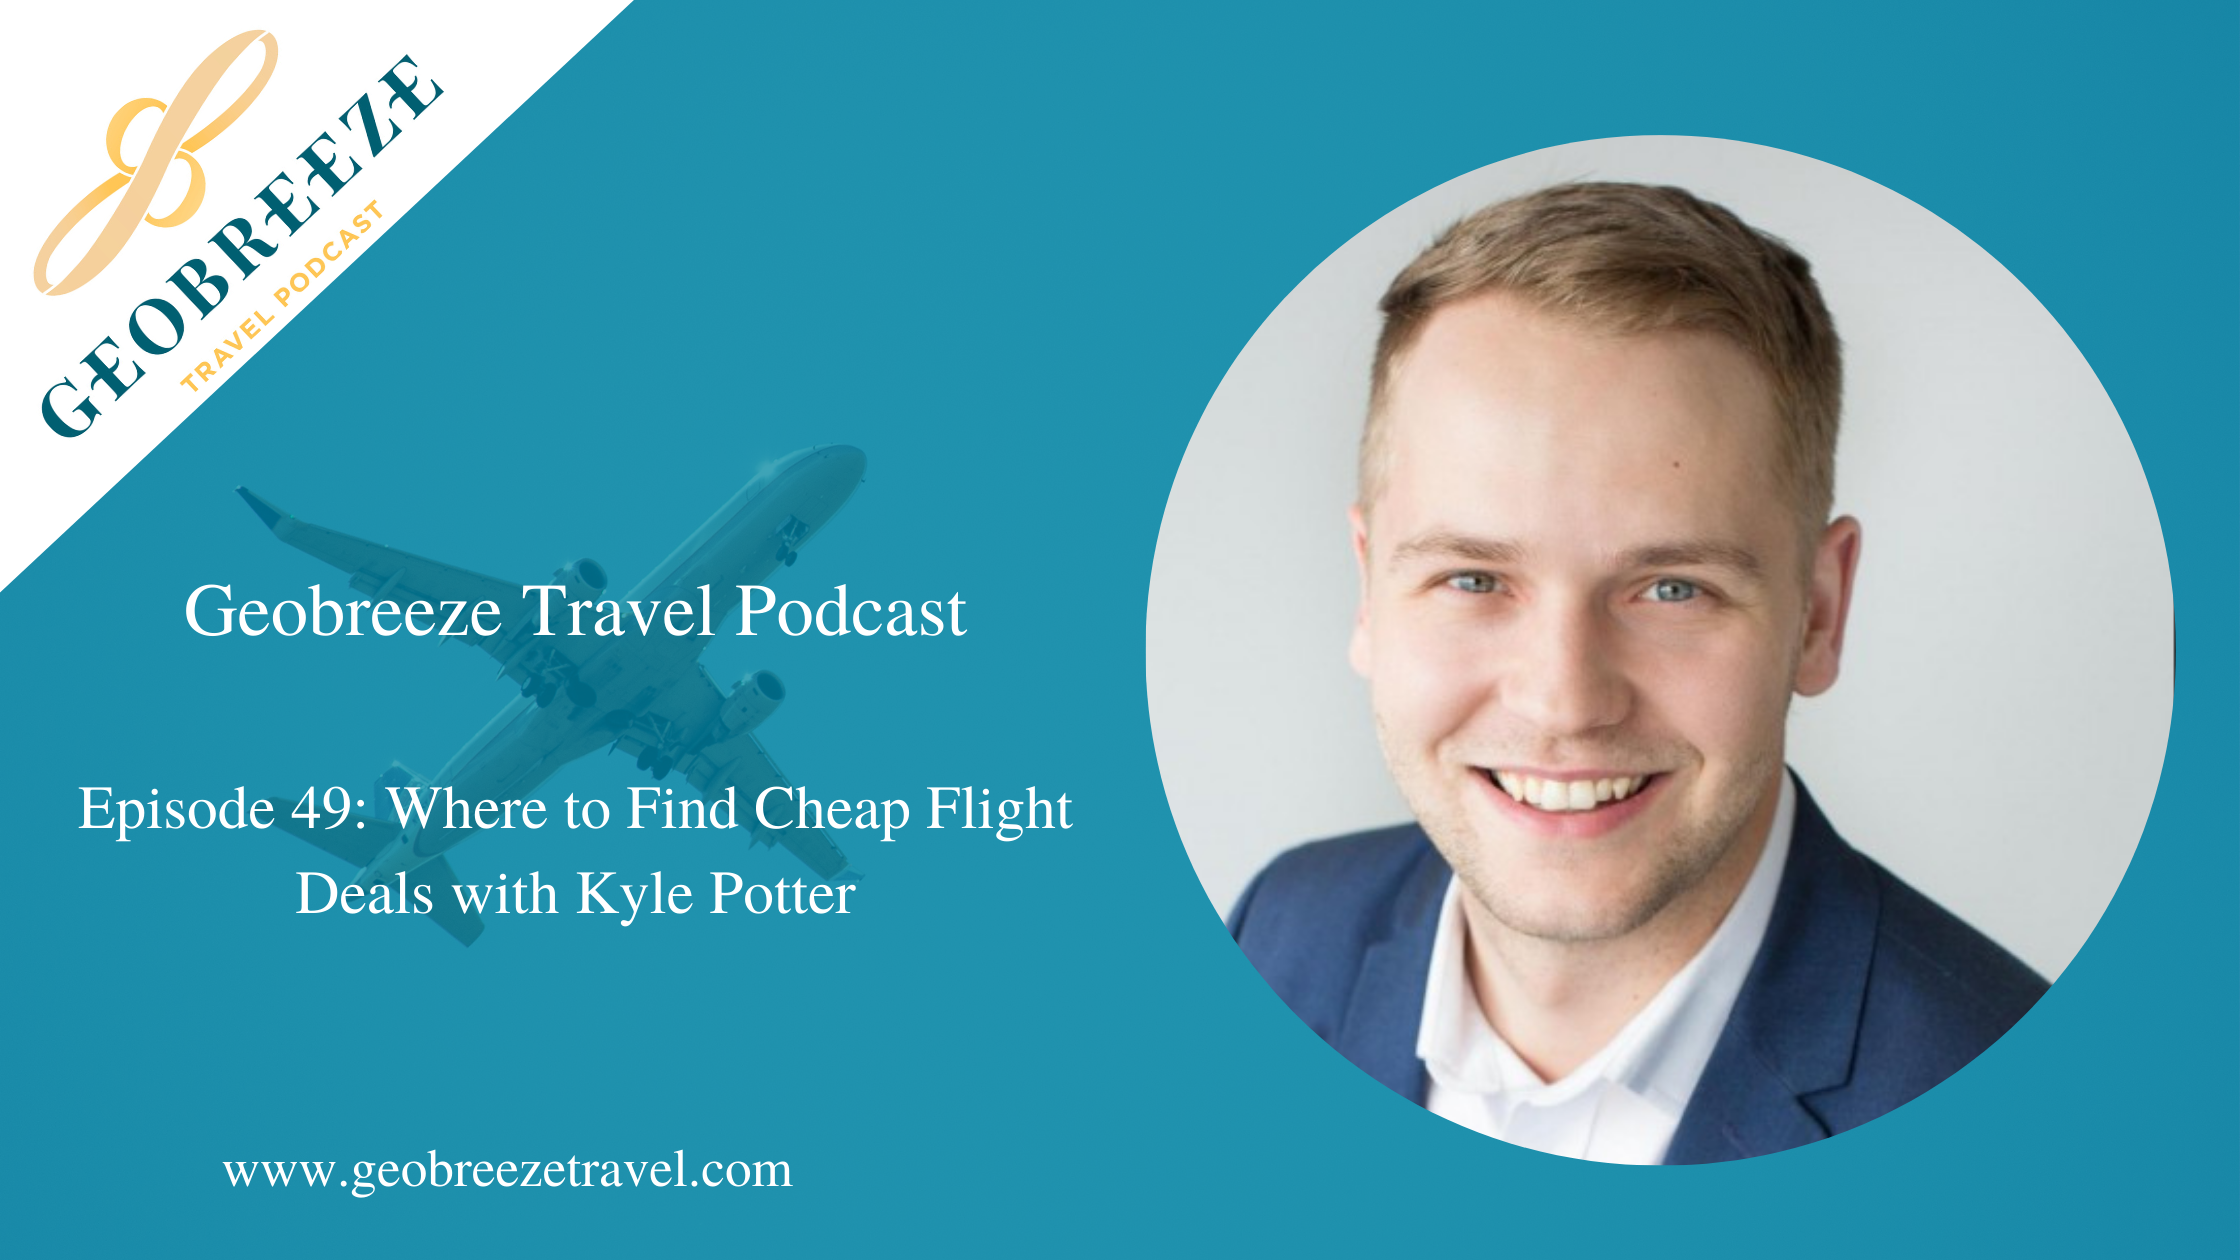 Episode 49: How to Find Cheap Flight Deals with Kyle Potter